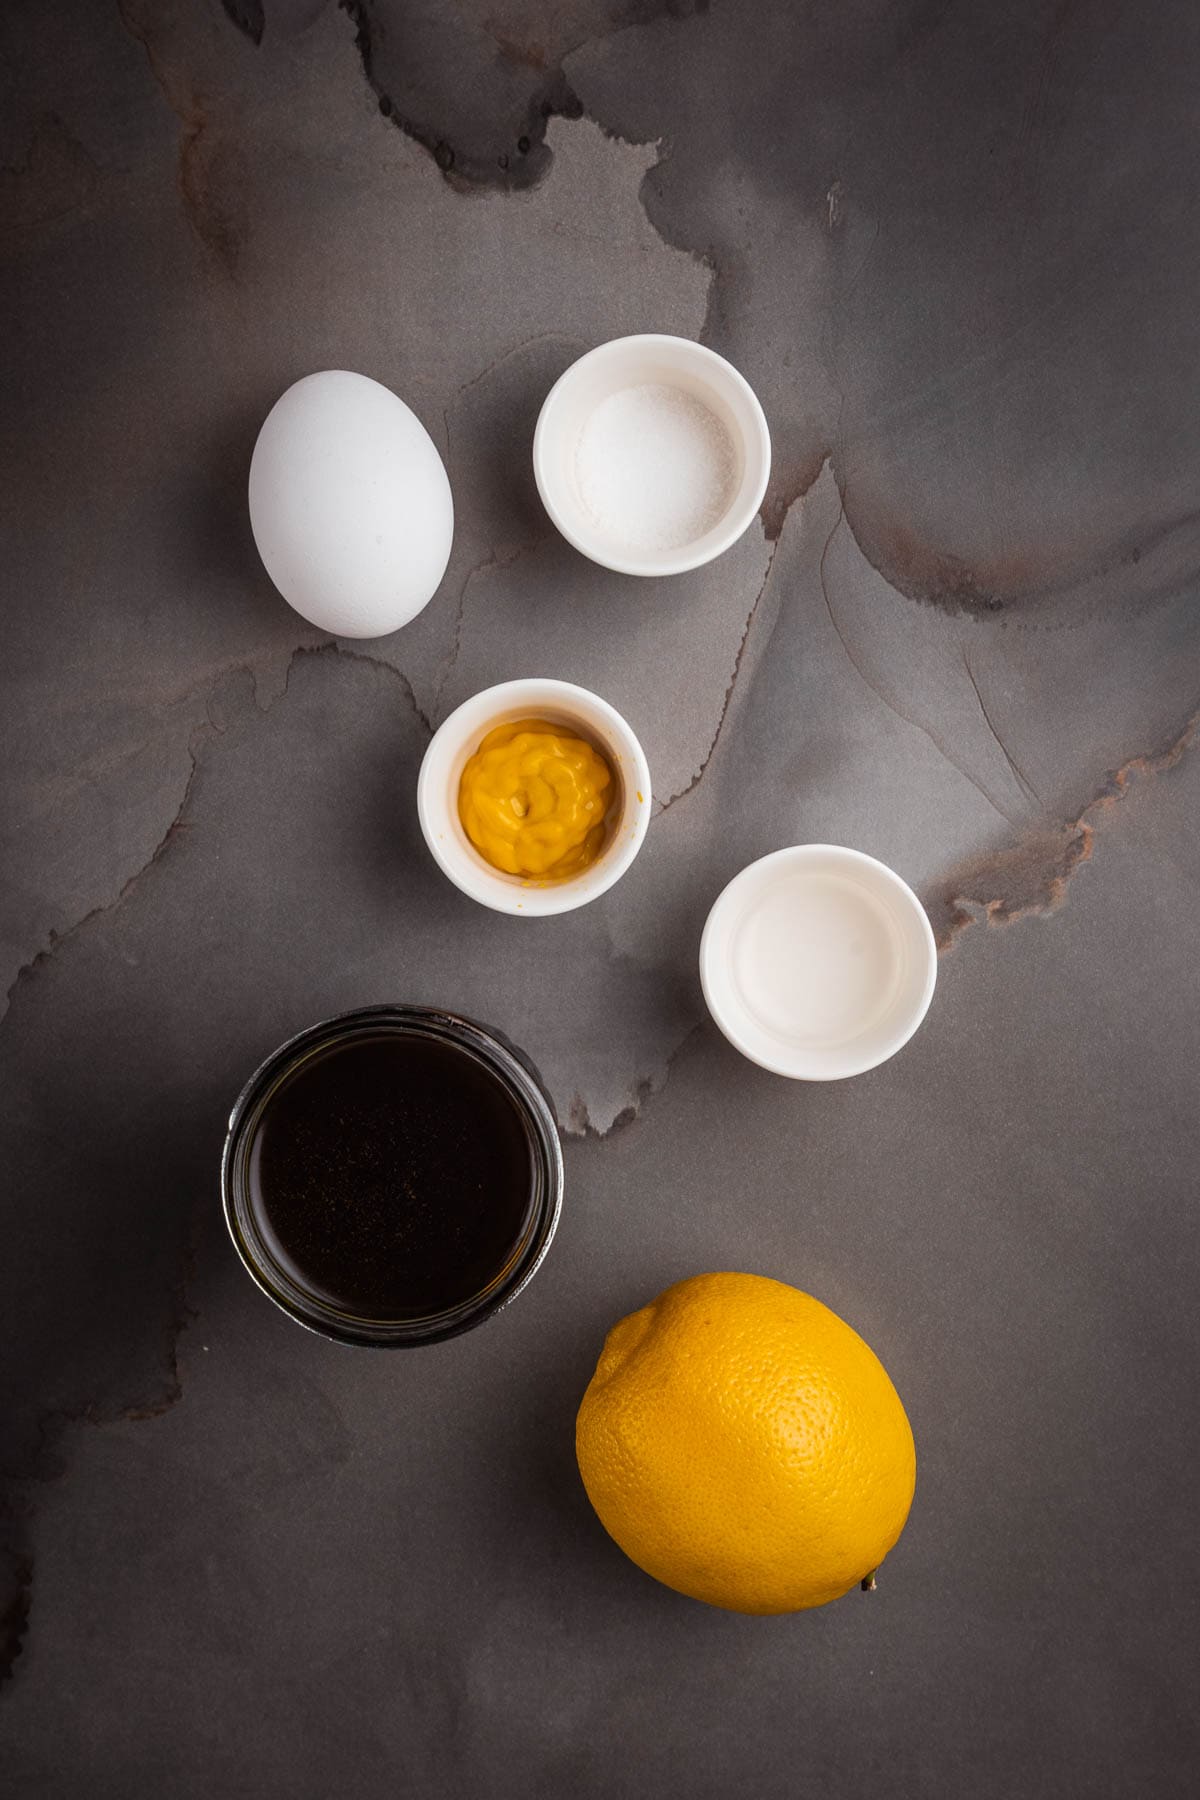 A bowl of lemon juice, eggs, and other ingredients on a gray background.